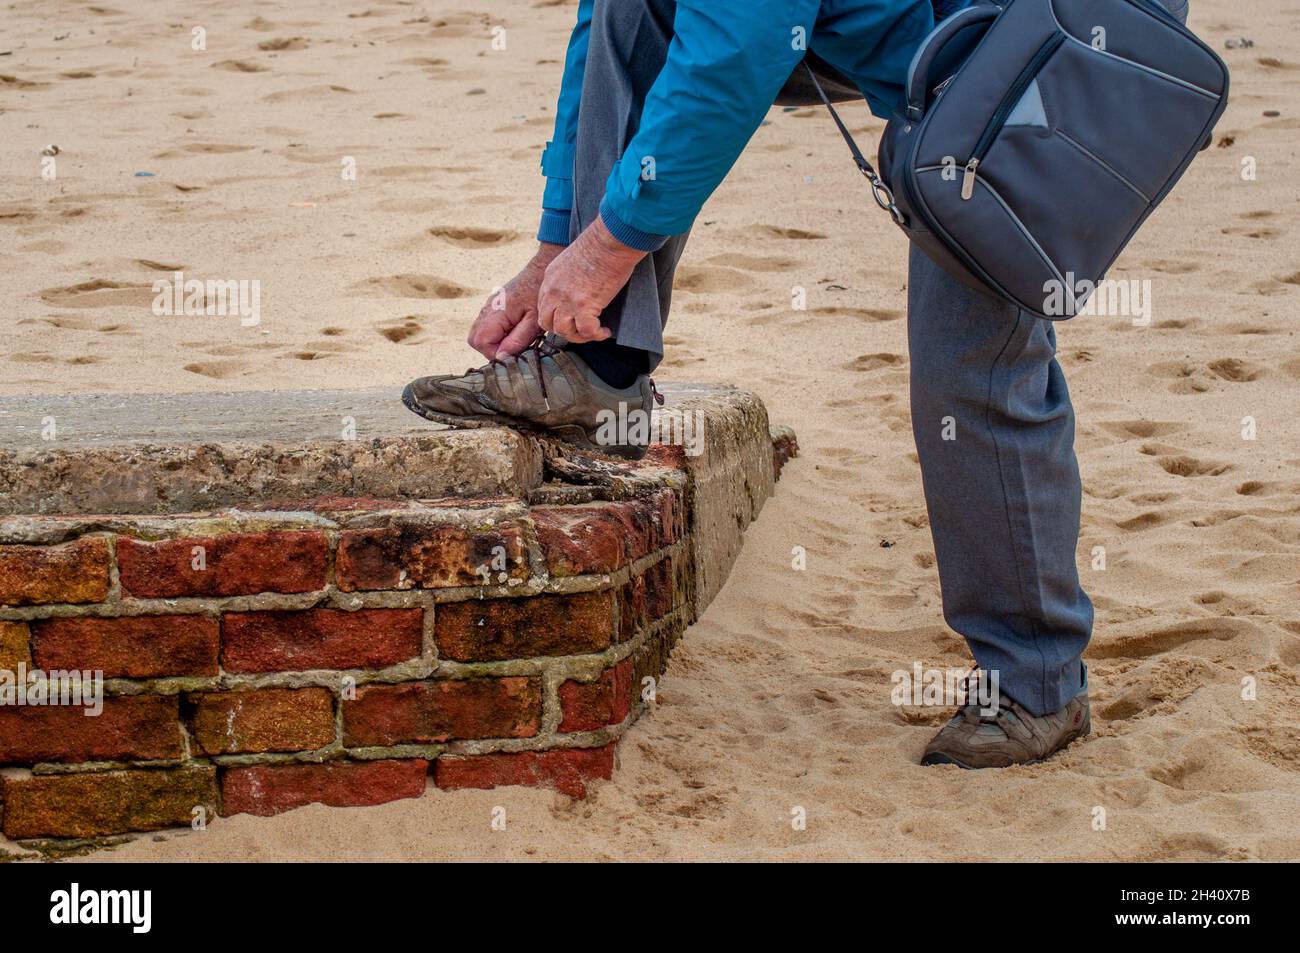 An elderly Caucasian man with a bag rests his foot on a brick wall submerged on a sandy beach to tie his shoe laces Stock Photo